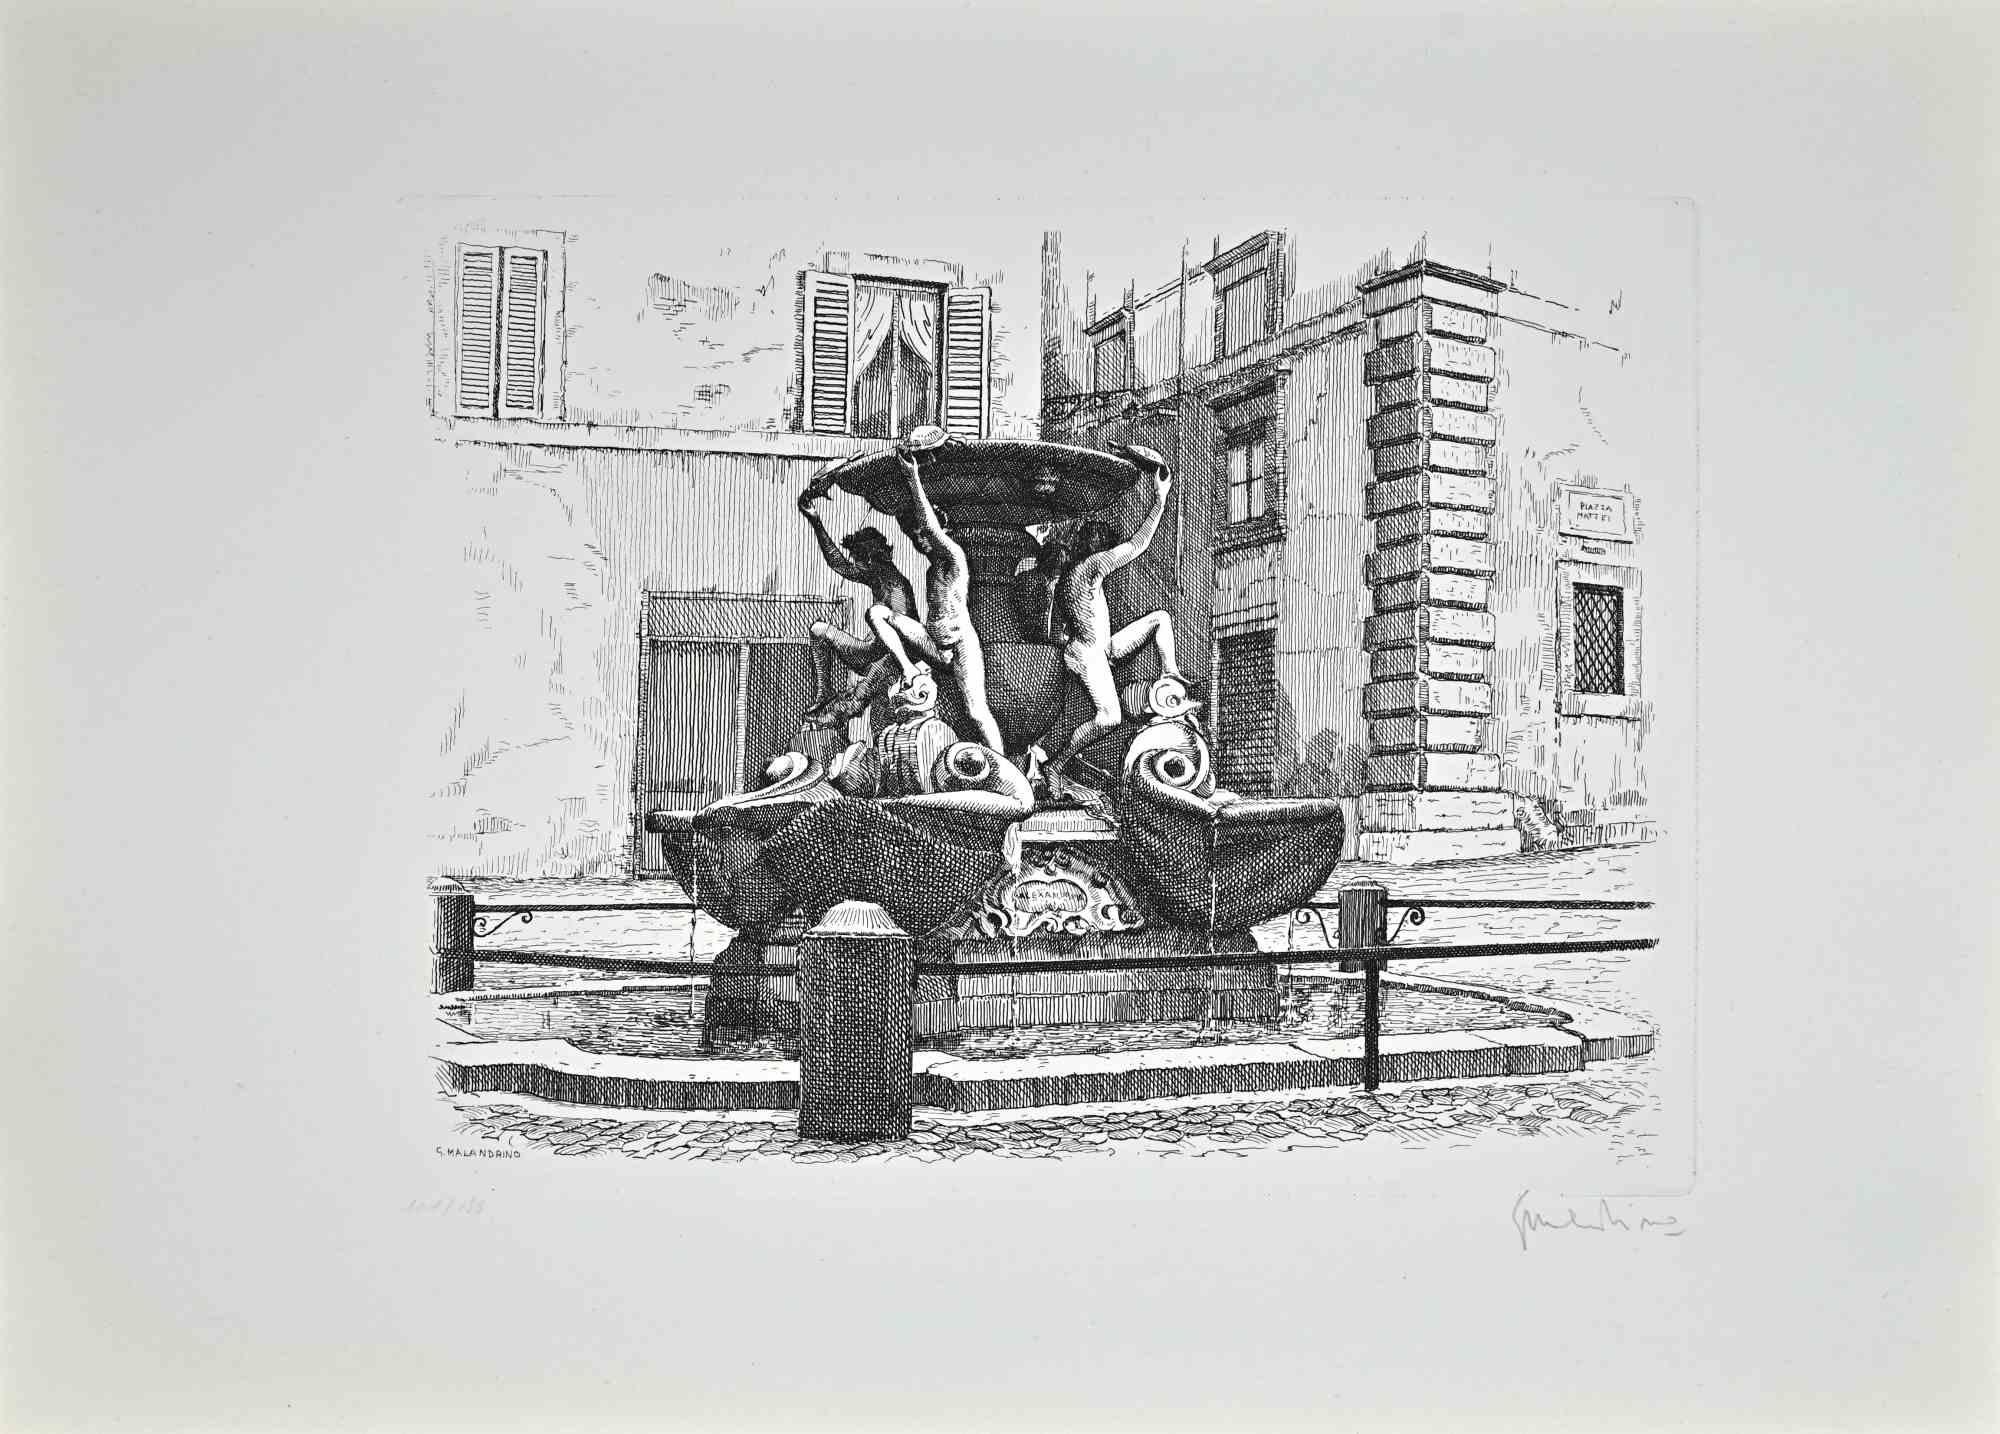 Fountain of the Turtles is an artwork realized by Giuseppe Malandrino.

Print in etching technique.

Hand-signed by the artist in pencil on the lower right corner.

Numbered edition of 199 copies.

Good condition. 

This artwork represents the